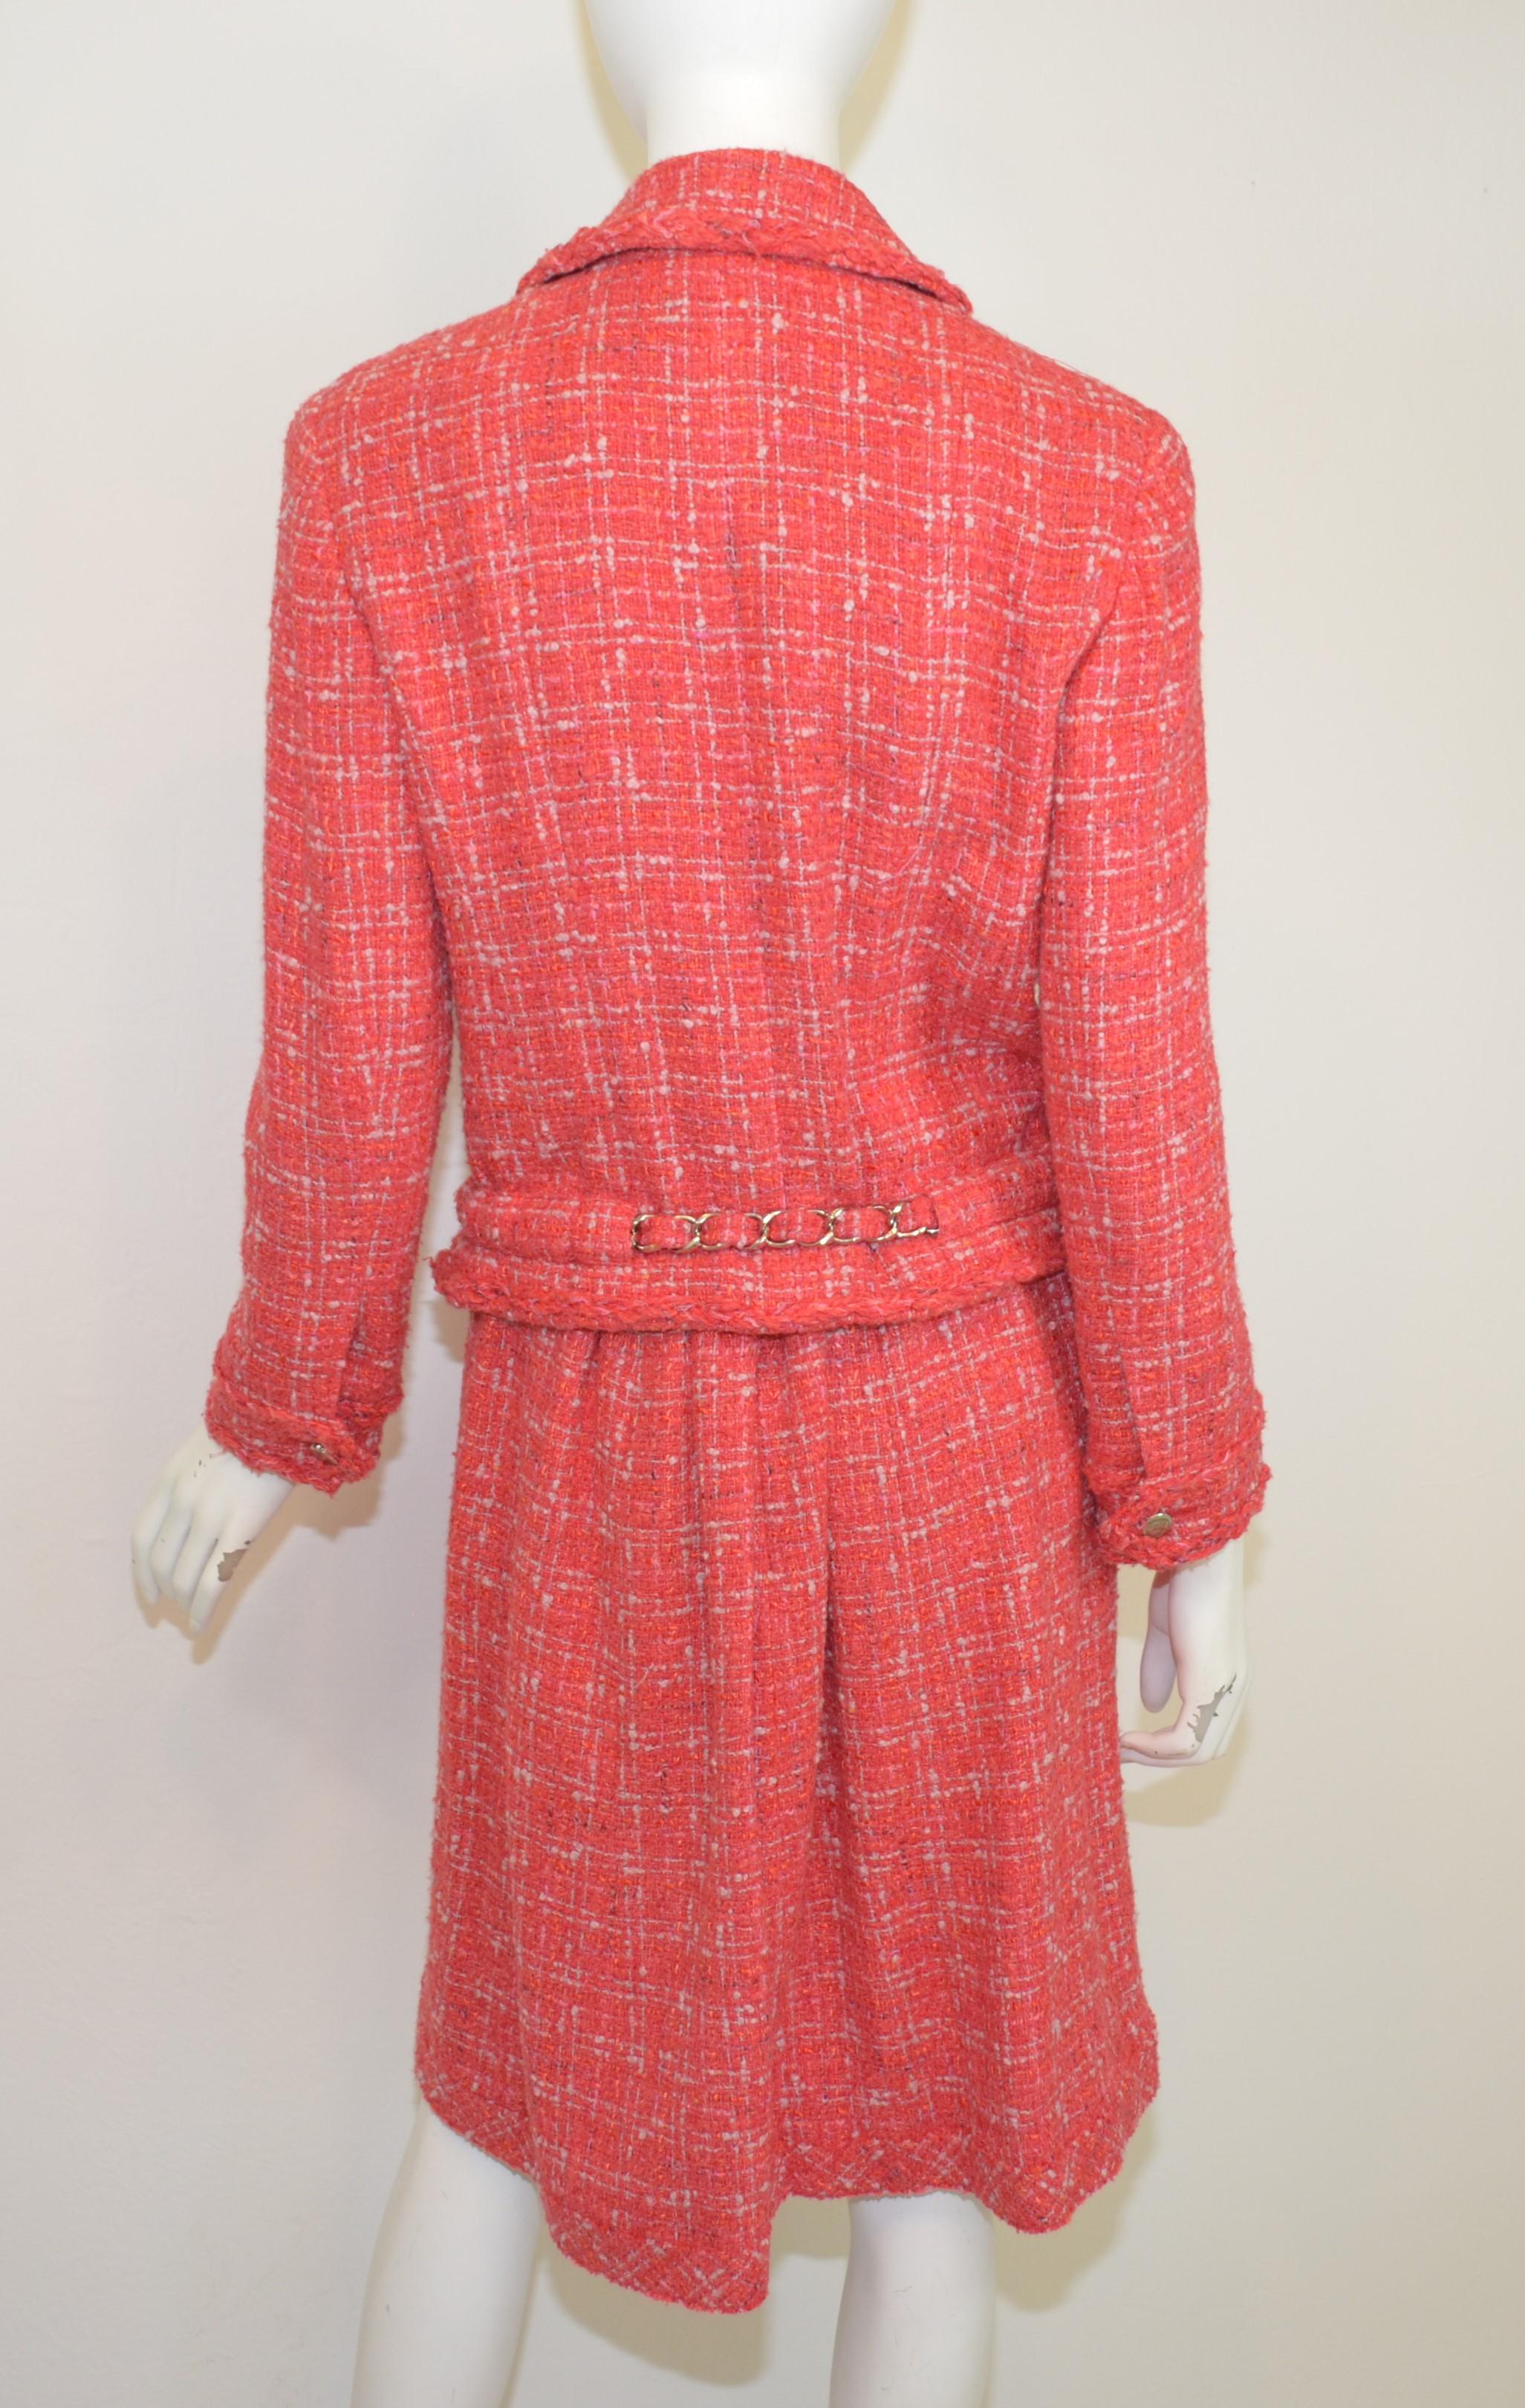 Chanel Coral Tweed Skirt with Chain Belted Jacket Set 1